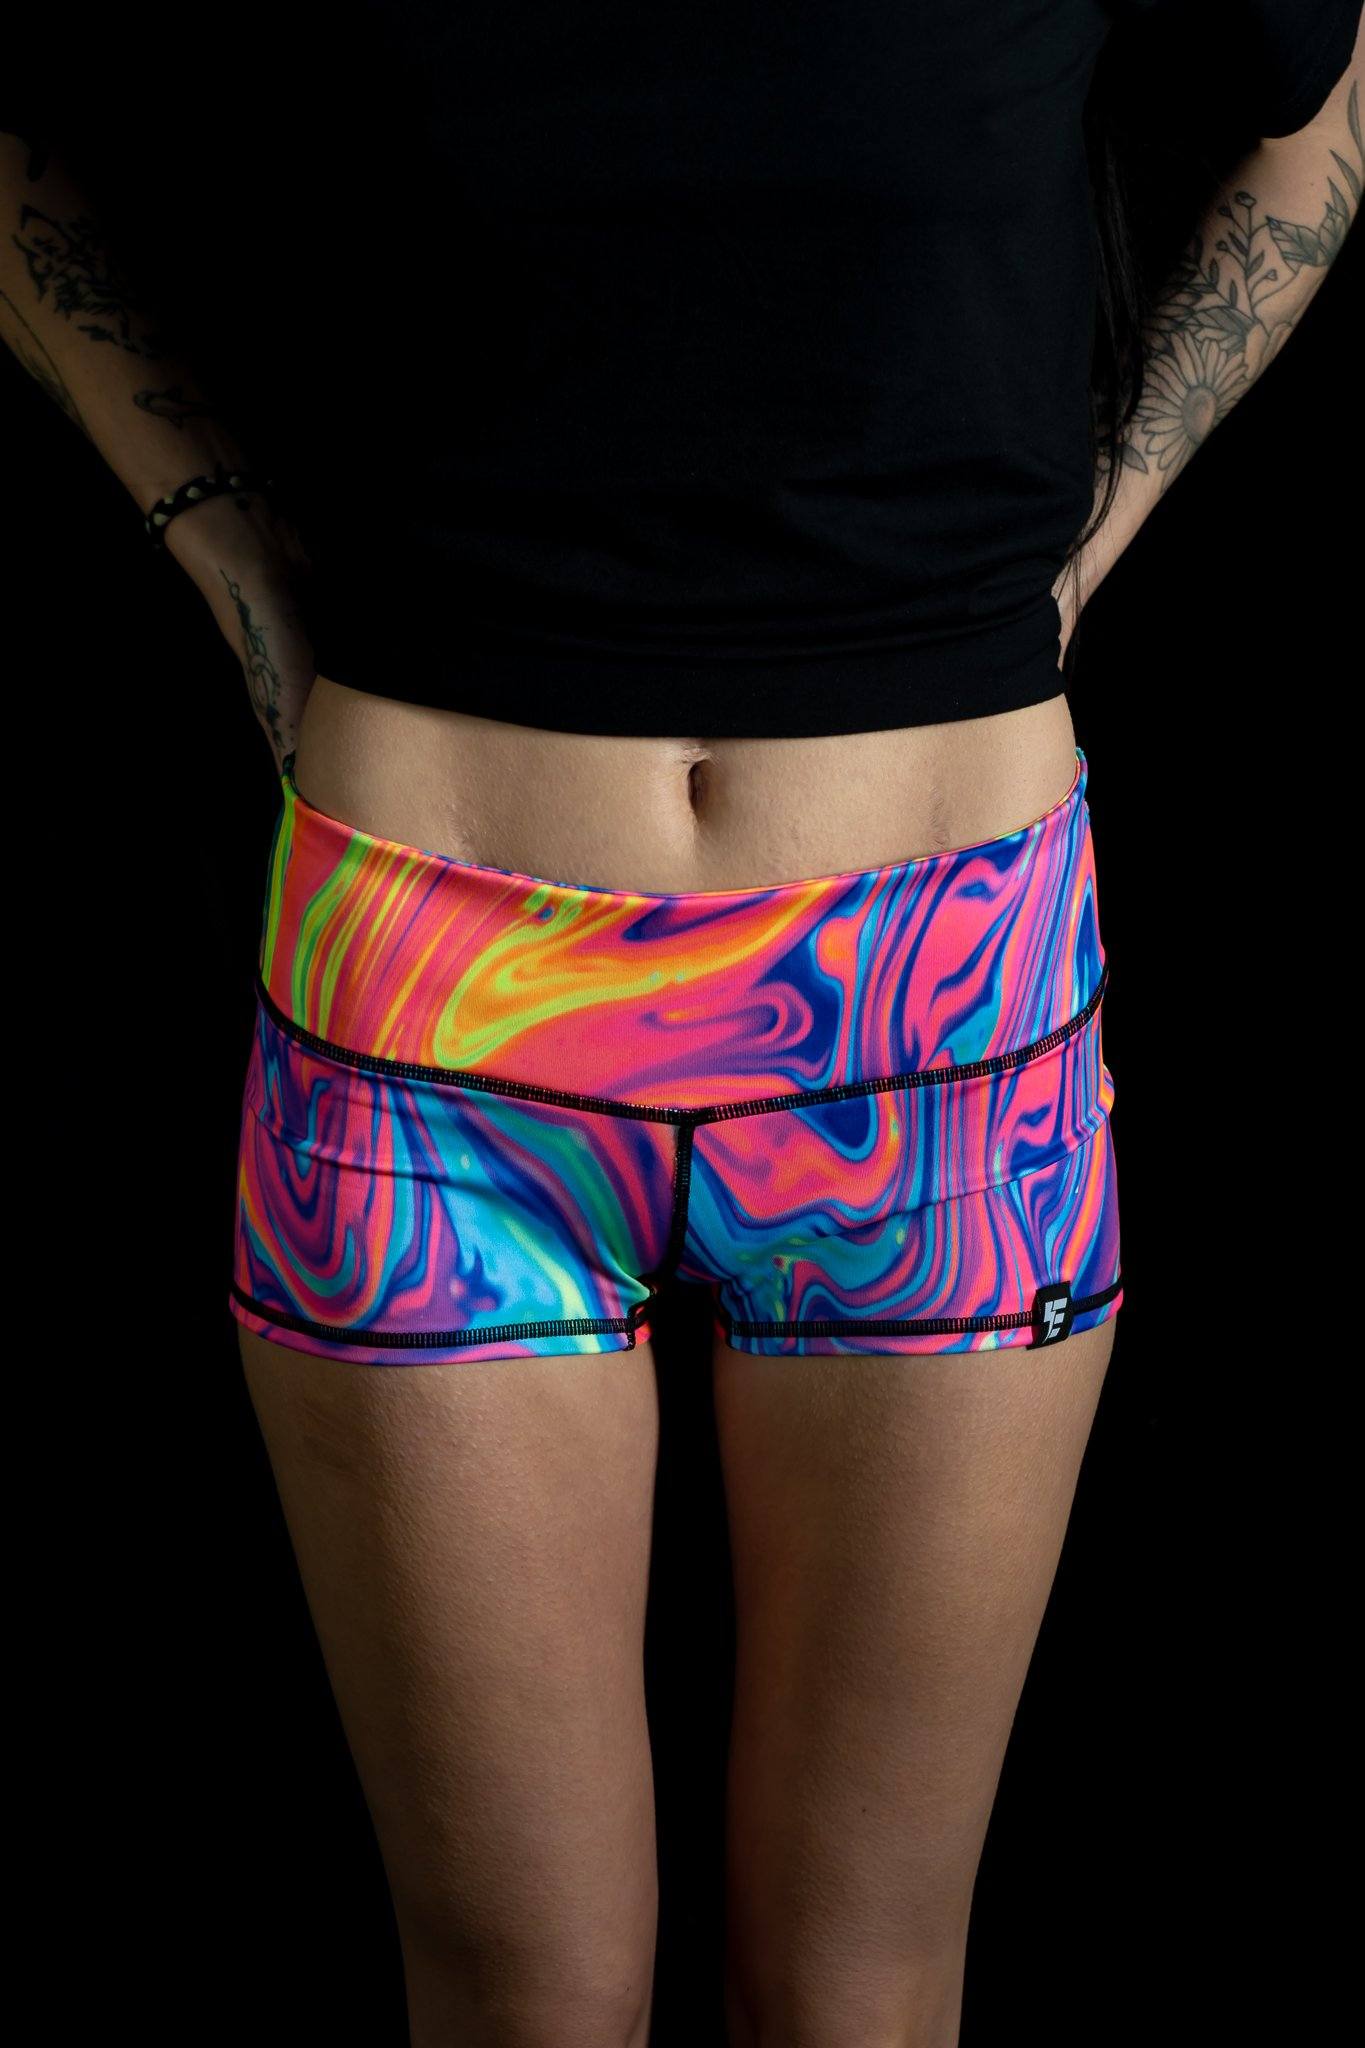 Neon Drippy (Pink) Shorts - Electro Threads